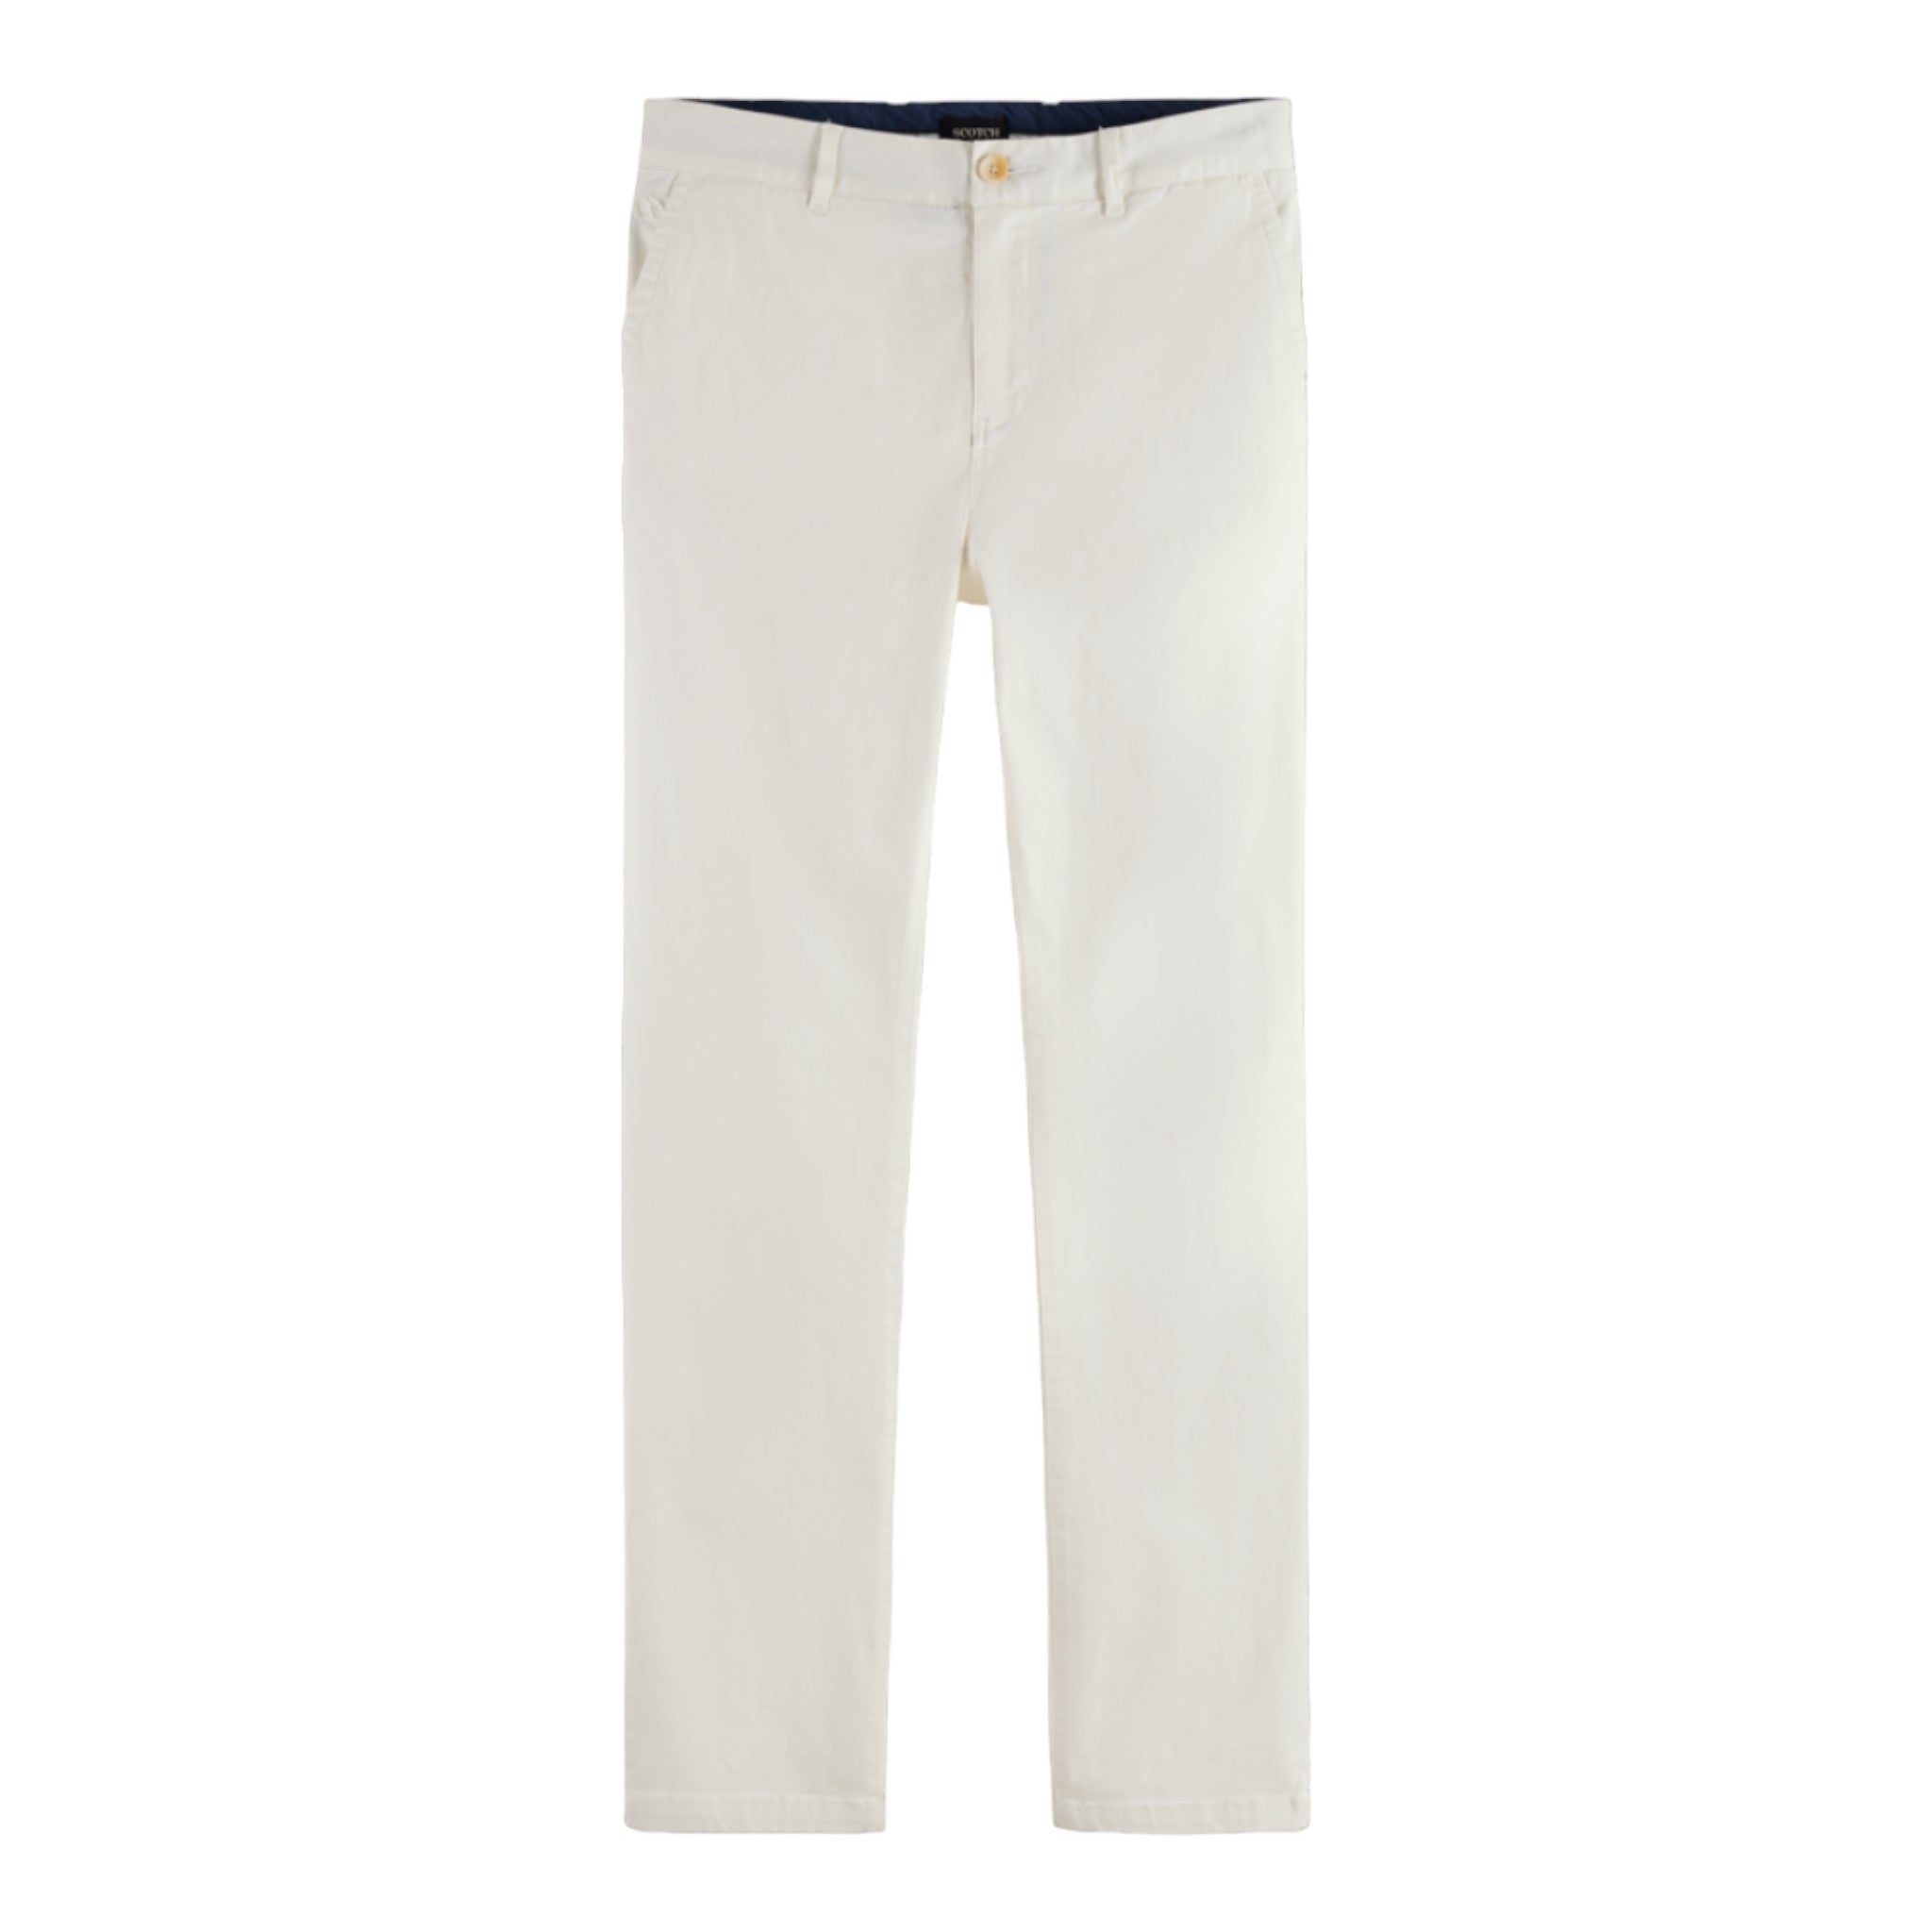 White fitted pants with button and zip closure